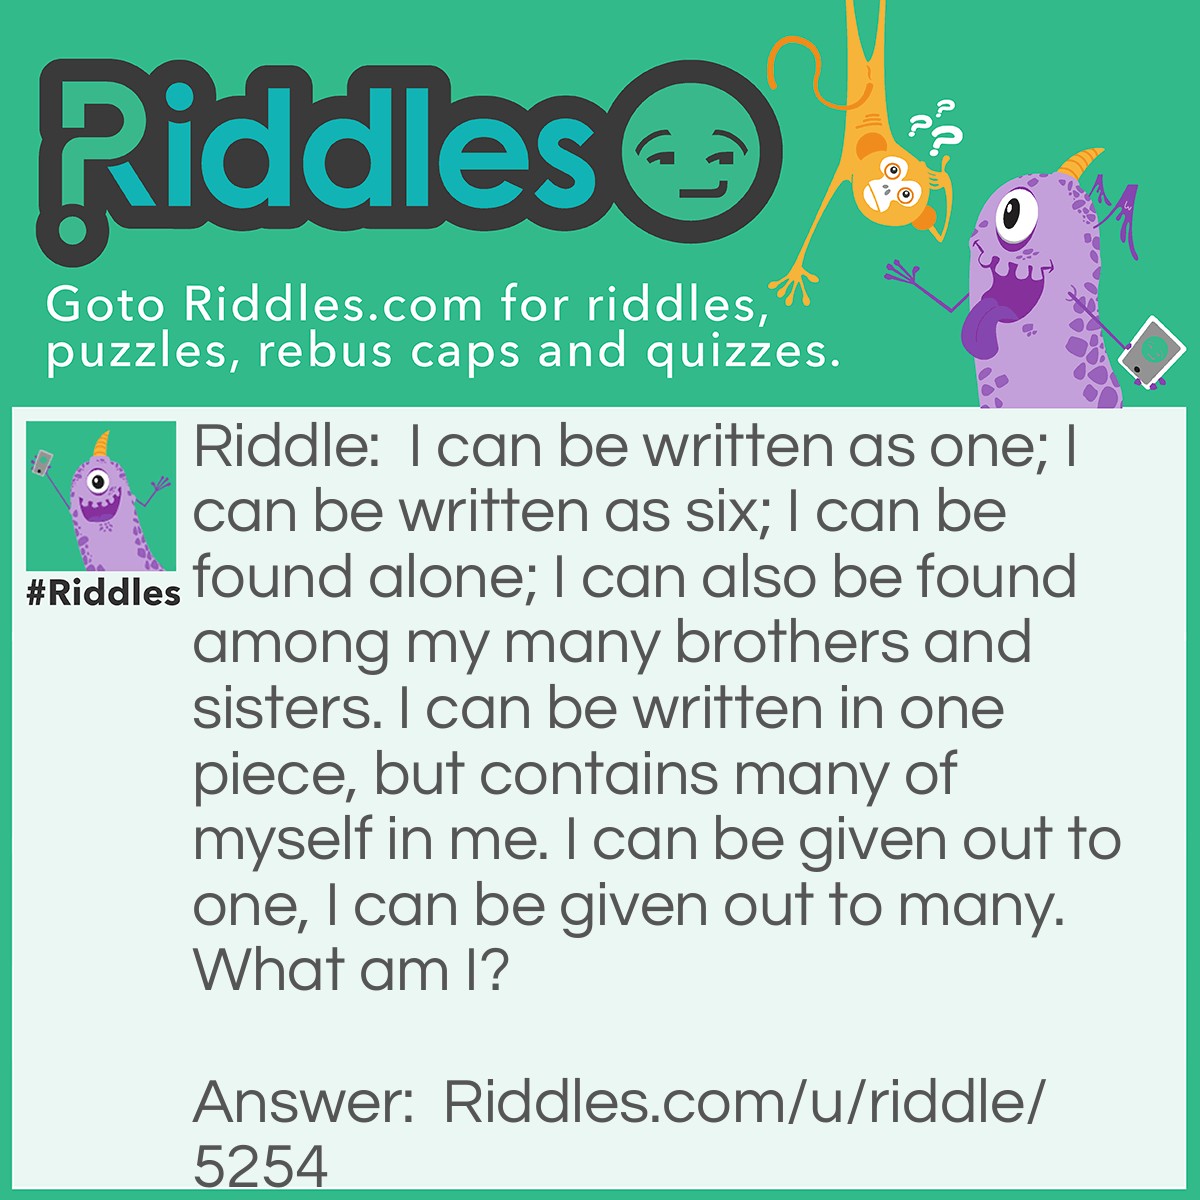 Riddle: I can be written as one; I can be written as six; I can be found alone; I can also be found among my many brothers and sisters. I can be written in one piece, but contains many of myself in me. I can be given out to one, I can be given out to many. What am I? Answer: Letters of the English Alphabet/LETTER